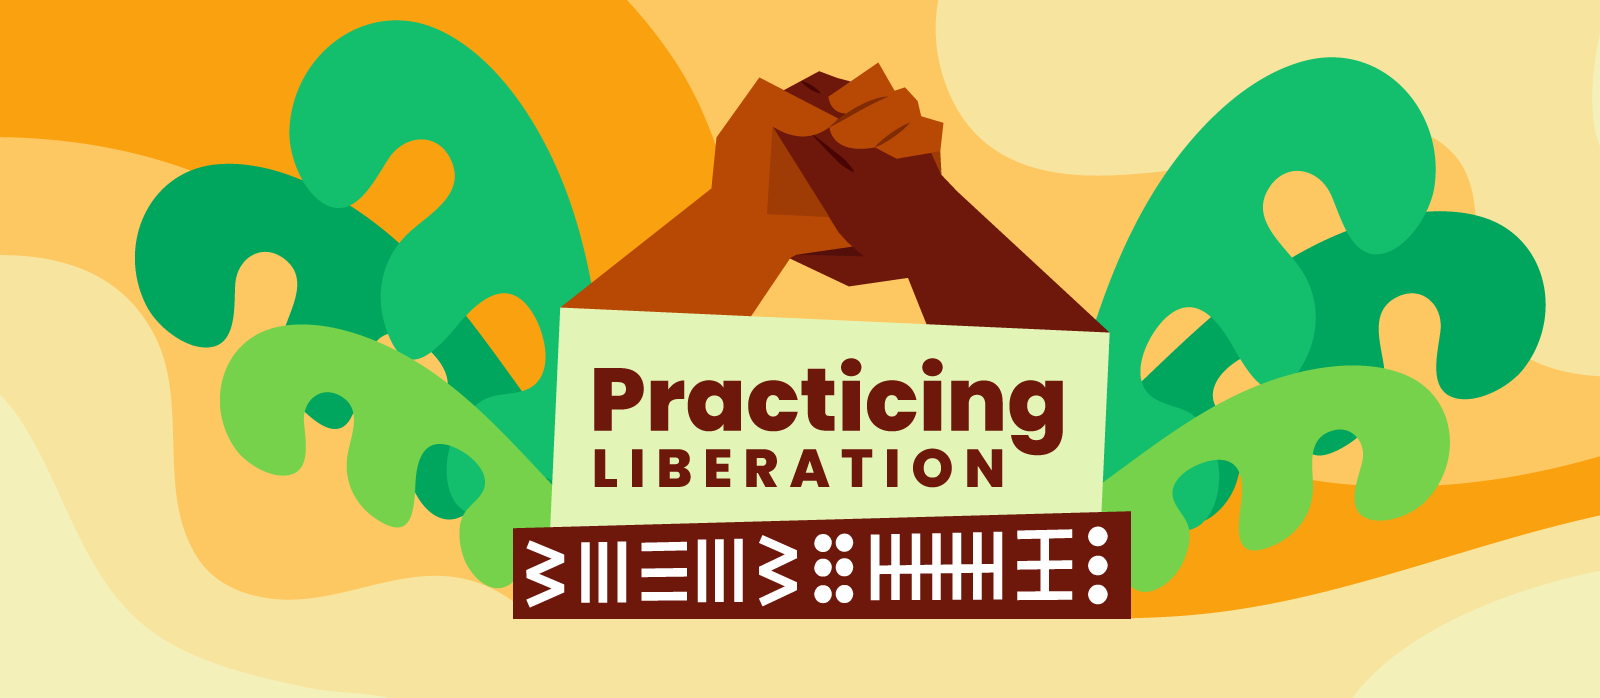 Practicing Liberation Graphic